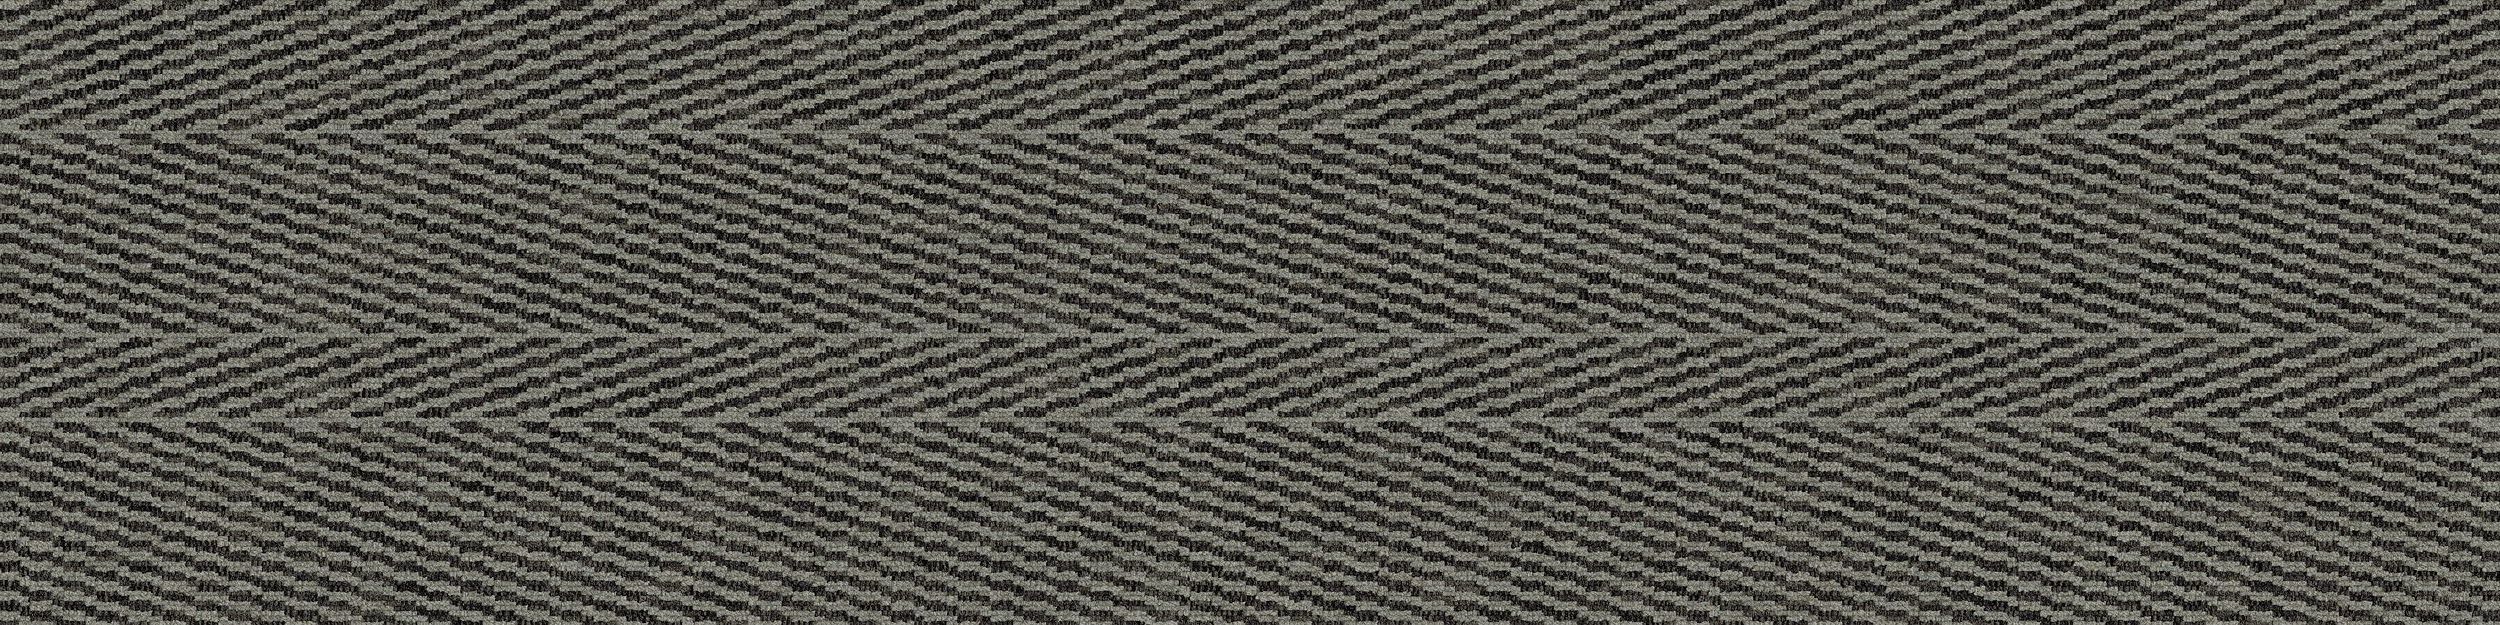 Stitch In Time Carpet Tile In Flannel Stitch image number 2